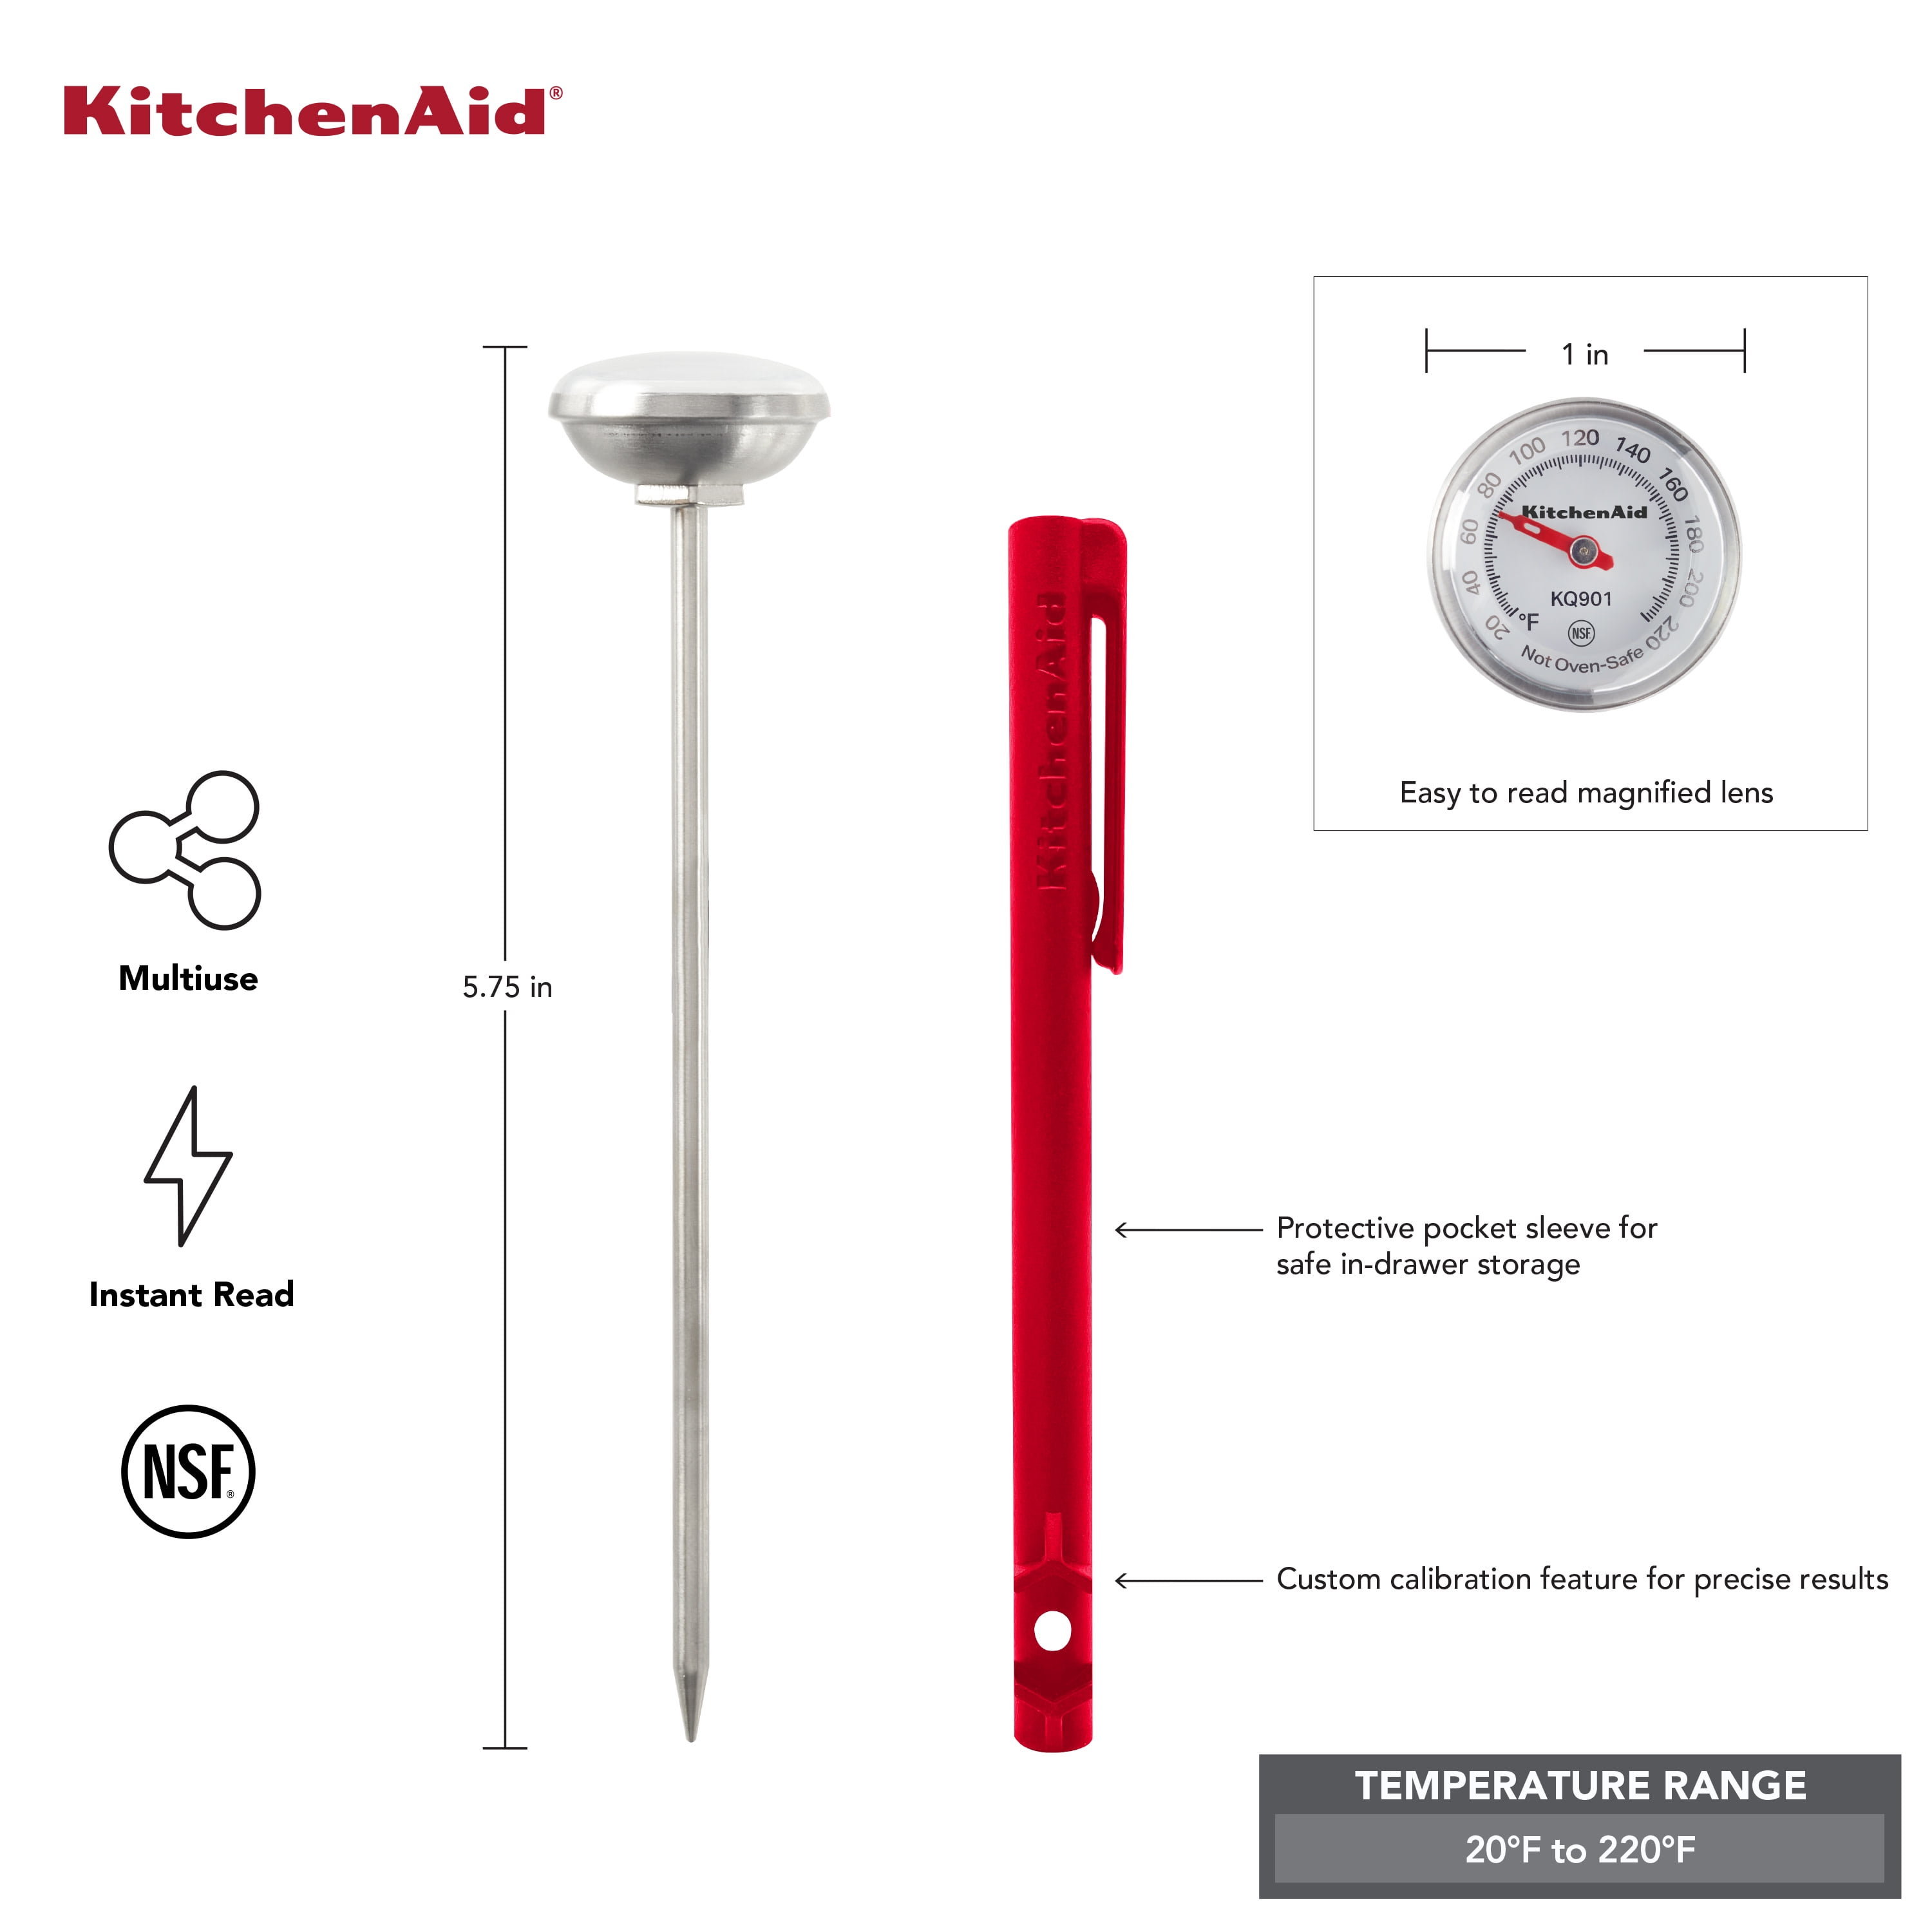 KitchenAid Leave-in, Oven/Grill Safe Meat Thermometer Stainless